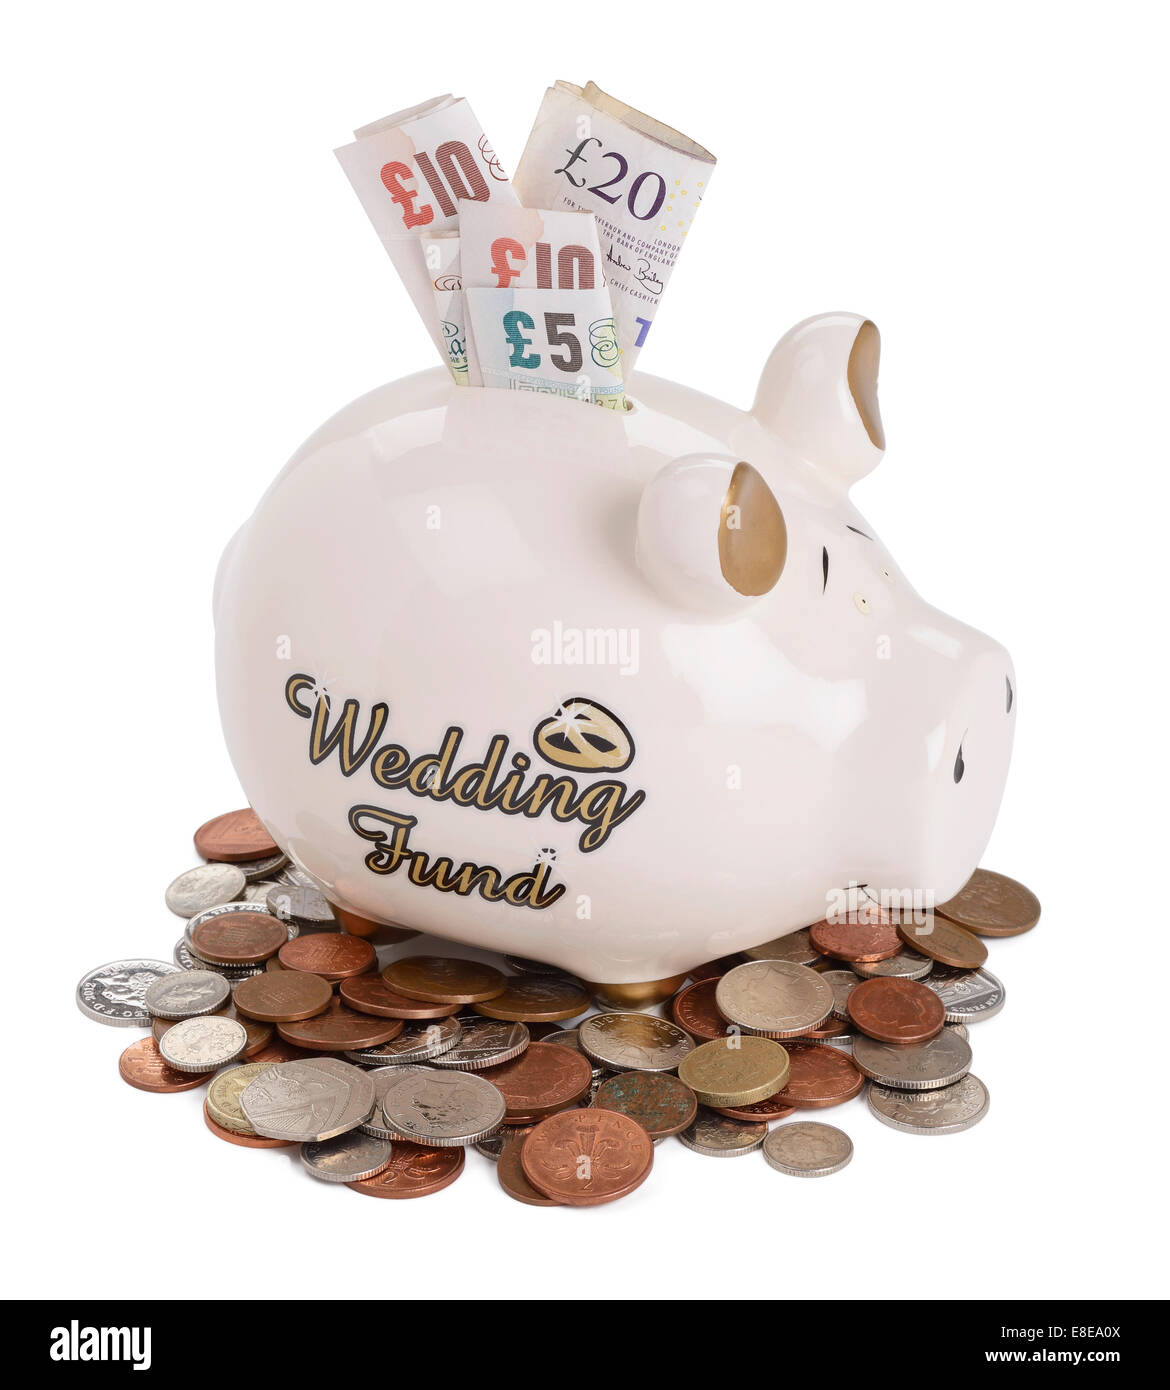 Wedding fund piggy bank with UK sterling coins and notes Stock Photo